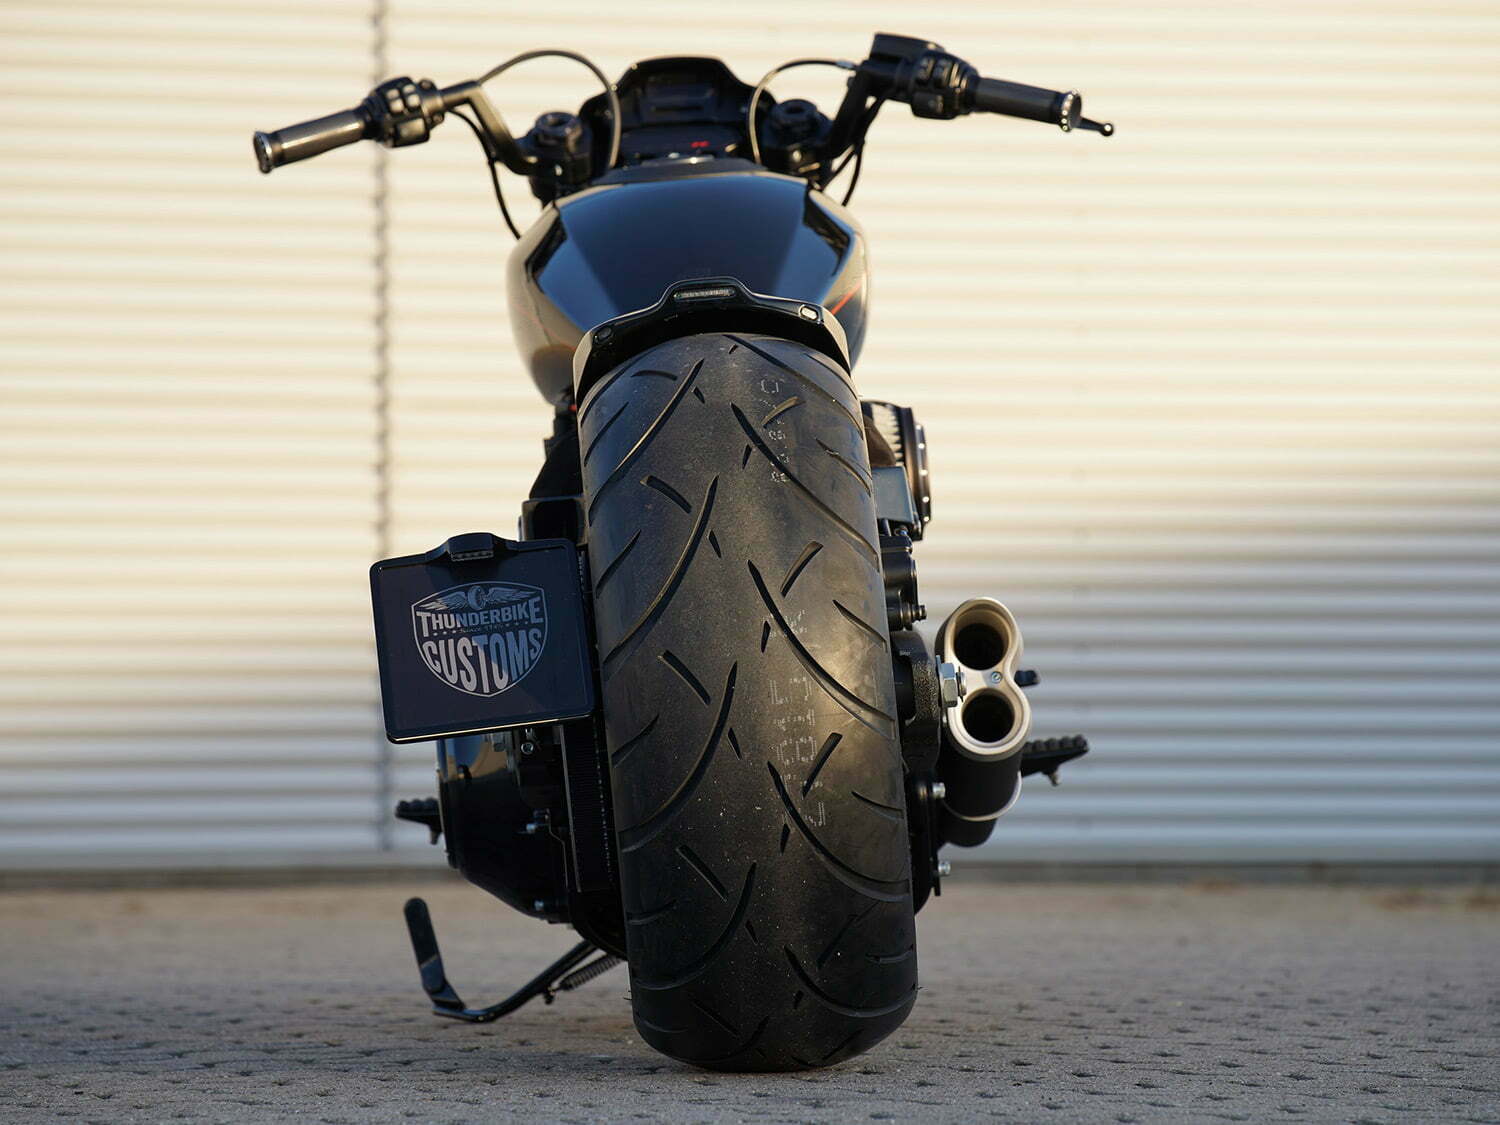 FXDR Fat rear tire